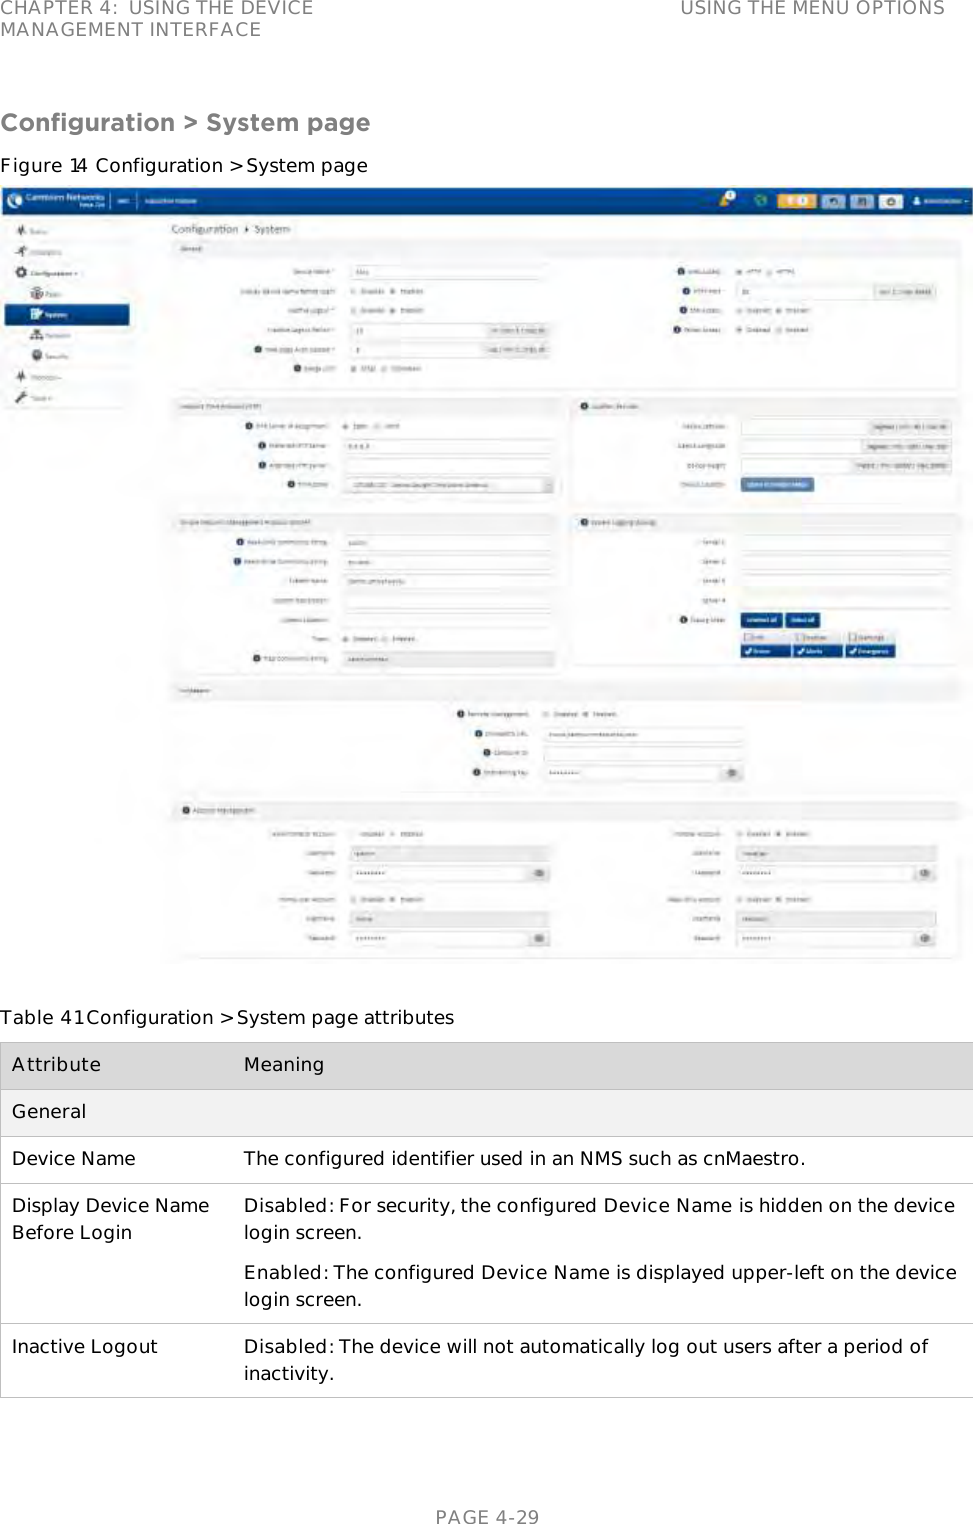 CHAPTER 4:  USING THE DEVICE MANAGEMENT INTERFACE USING THE MENU OPTIONS   PAGE 4-29 Configuration &gt; System page Figure 14 Configuration &gt; System page   Table 41 Configuration &gt; System page attributes Attribute Meaning General  Device Name The configured identifier used in an NMS such as cnMaestro. Display Device Name Before Login Disabled: For security, the configured Device Name is hidden on the device login screen. Enabled: The configured Device Name is displayed upper-left on the device login screen. Inactive Logout Disabled: The device will not automatically log out users after a period of inactivity. 